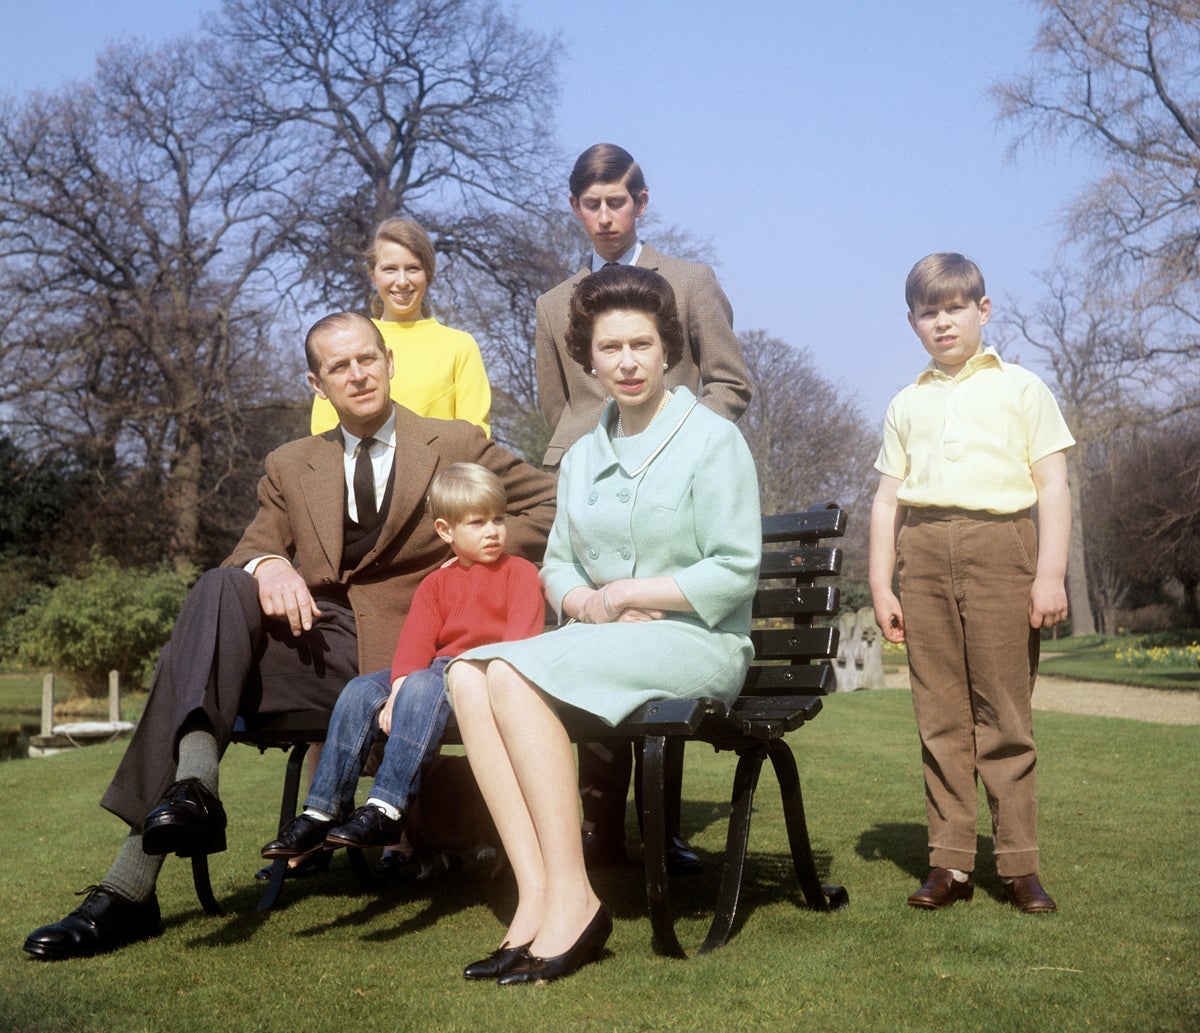 The Royal Family in the grounds of Frogmore House, Windsor, Berkshire. Left to right: Duke of Edinburgh, Princess Anne, Prince Edward, Queen Elizabeth II, Prince Charles (behind the Queen) and Prince Andrew